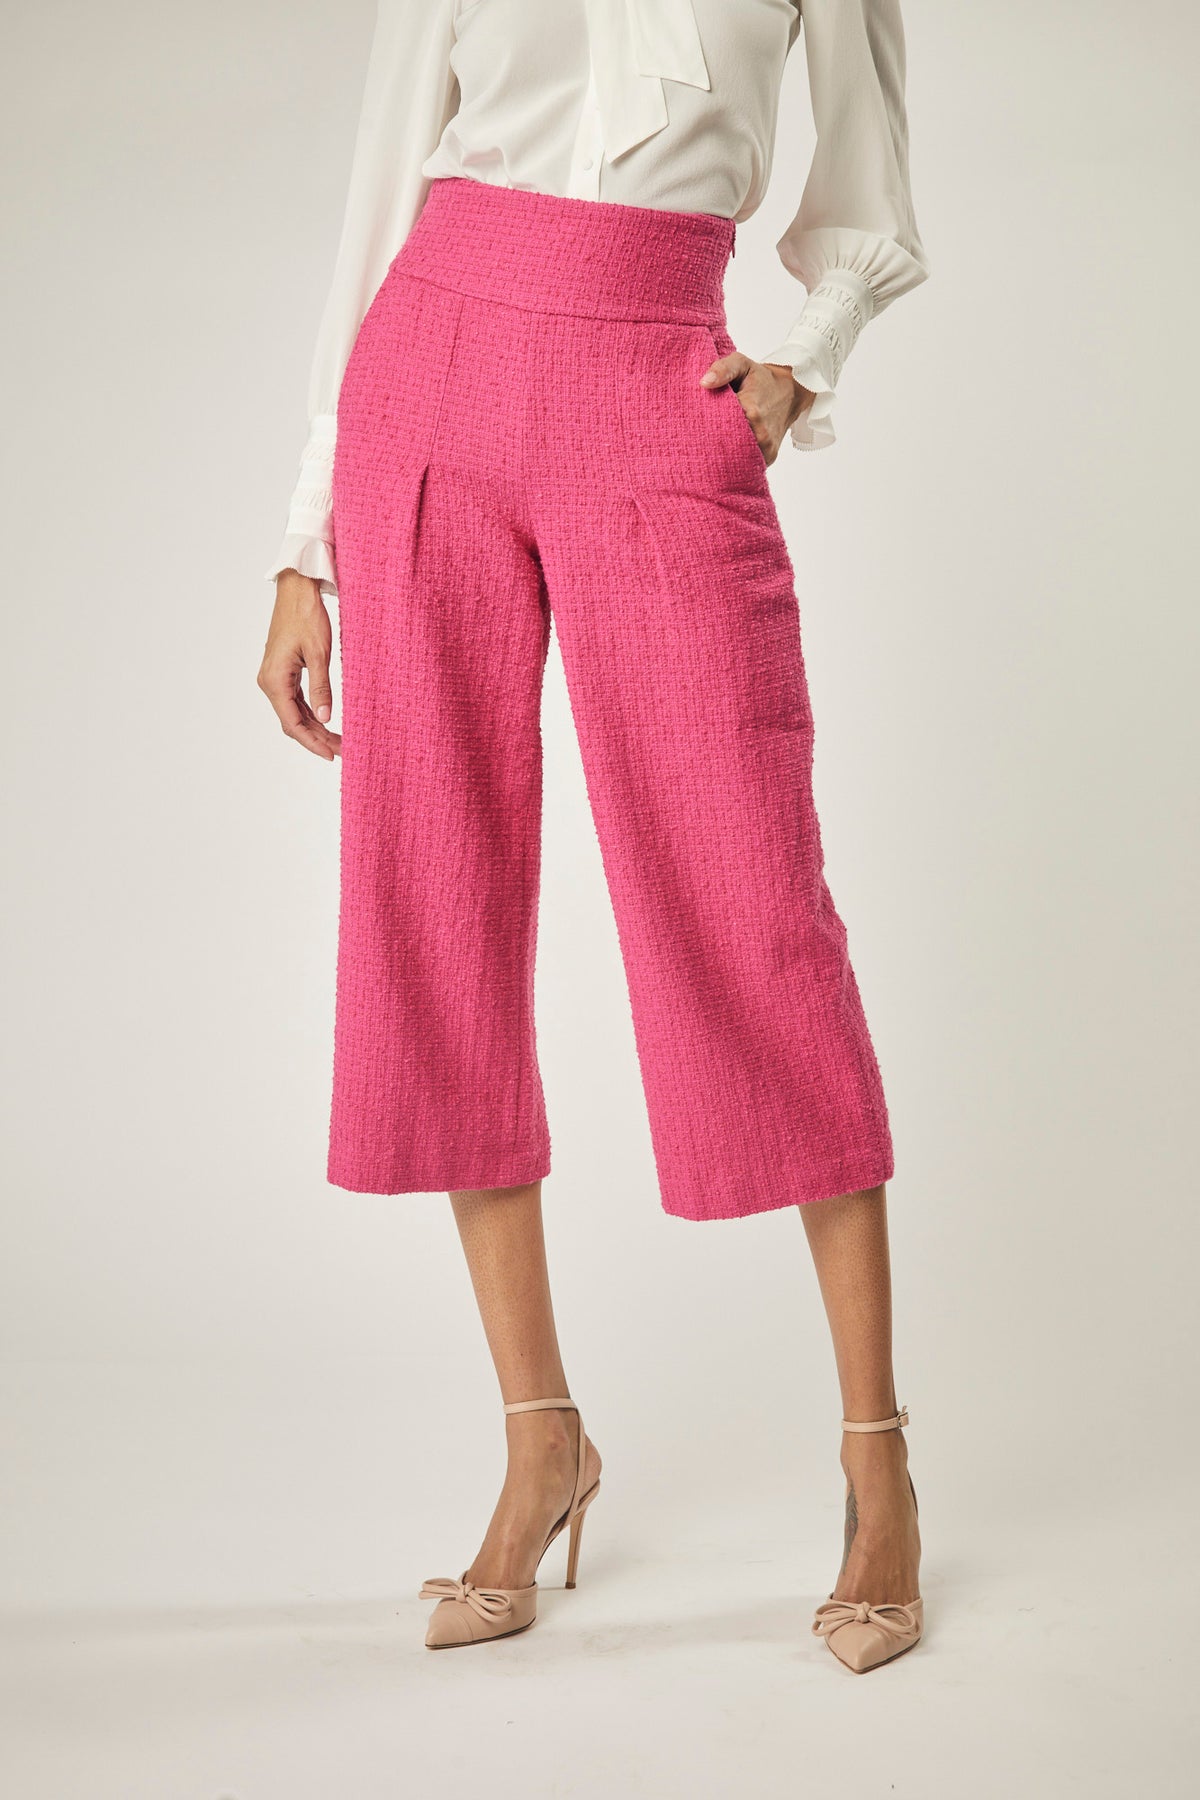 Jacqueline Cotton Tweed Pants In Hot Pink